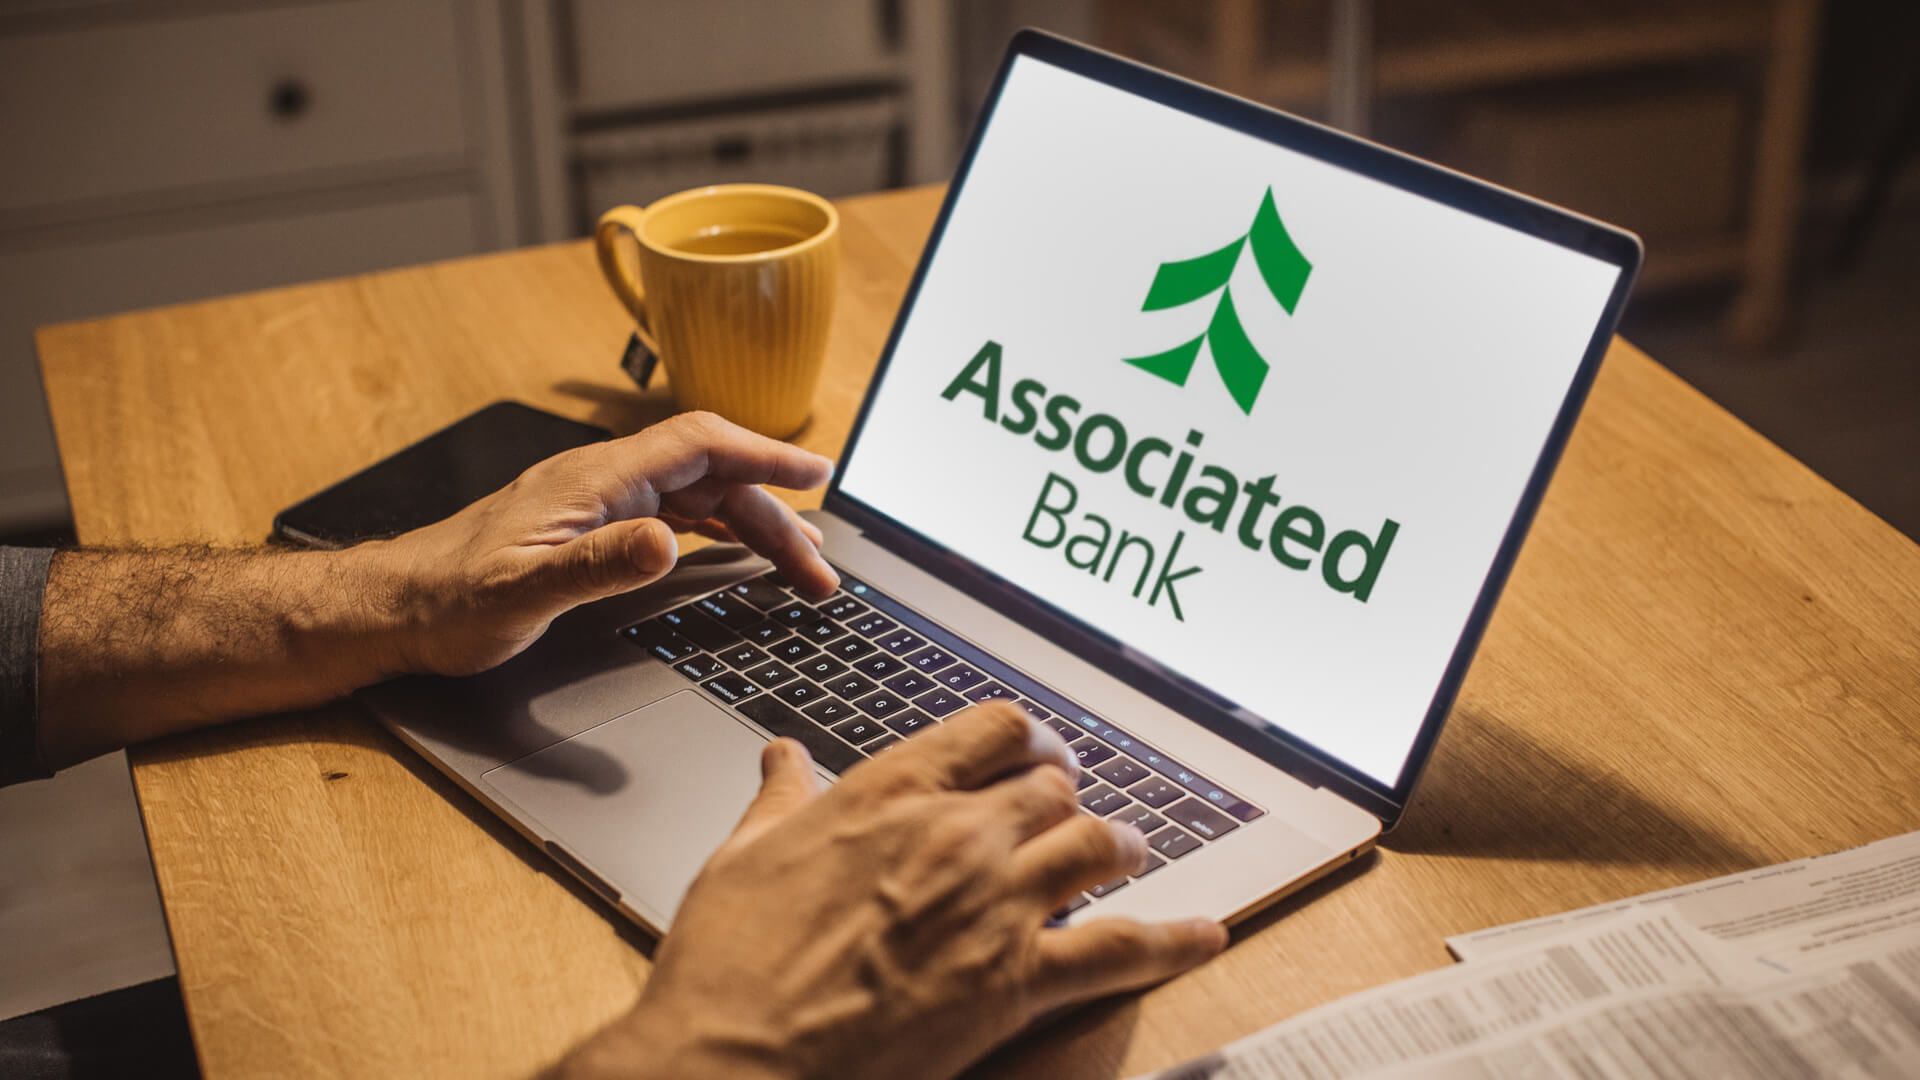 Is Associated Bank a real bank?